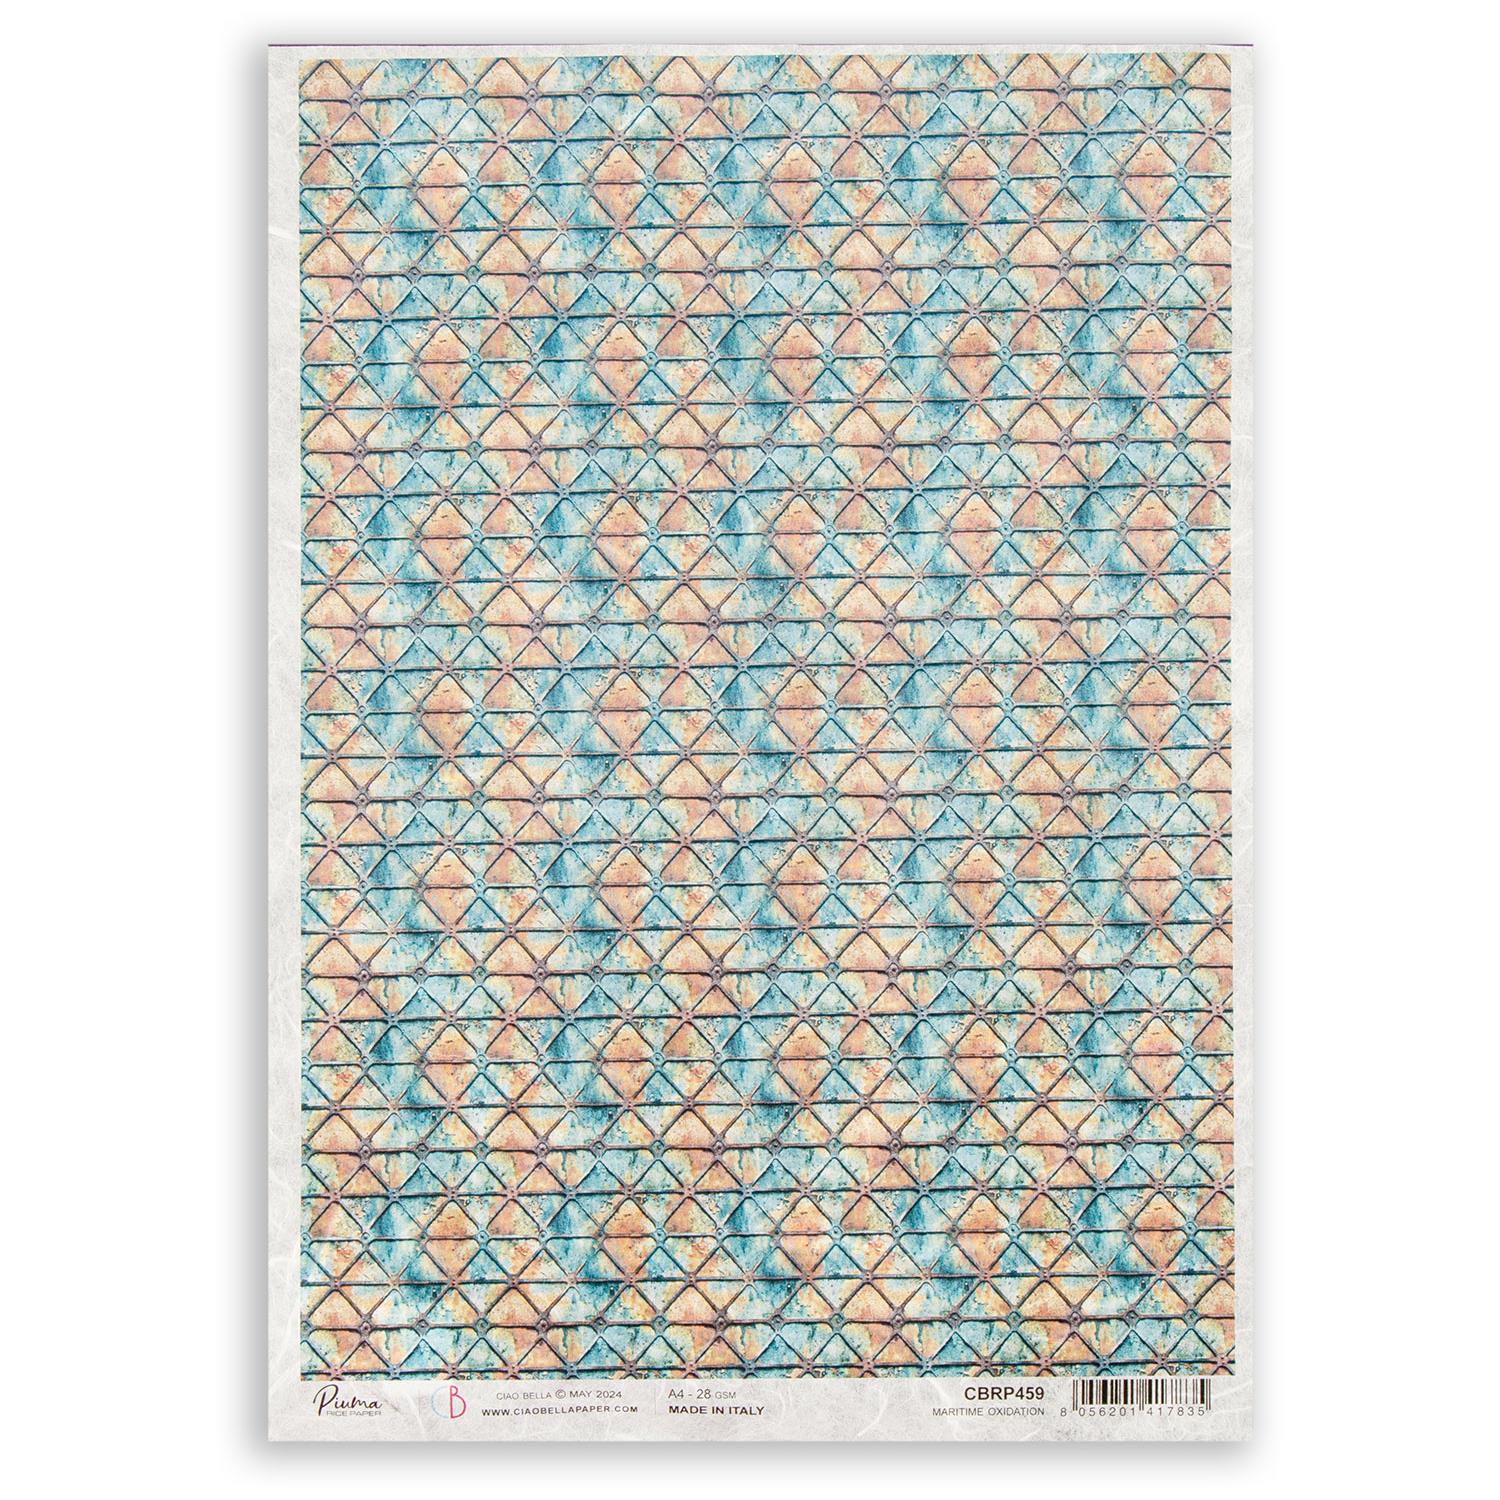 Ciao Bella 5 x Coral Reef A4 Rice Paper - Choose any 5 - Maritime Oxidation 